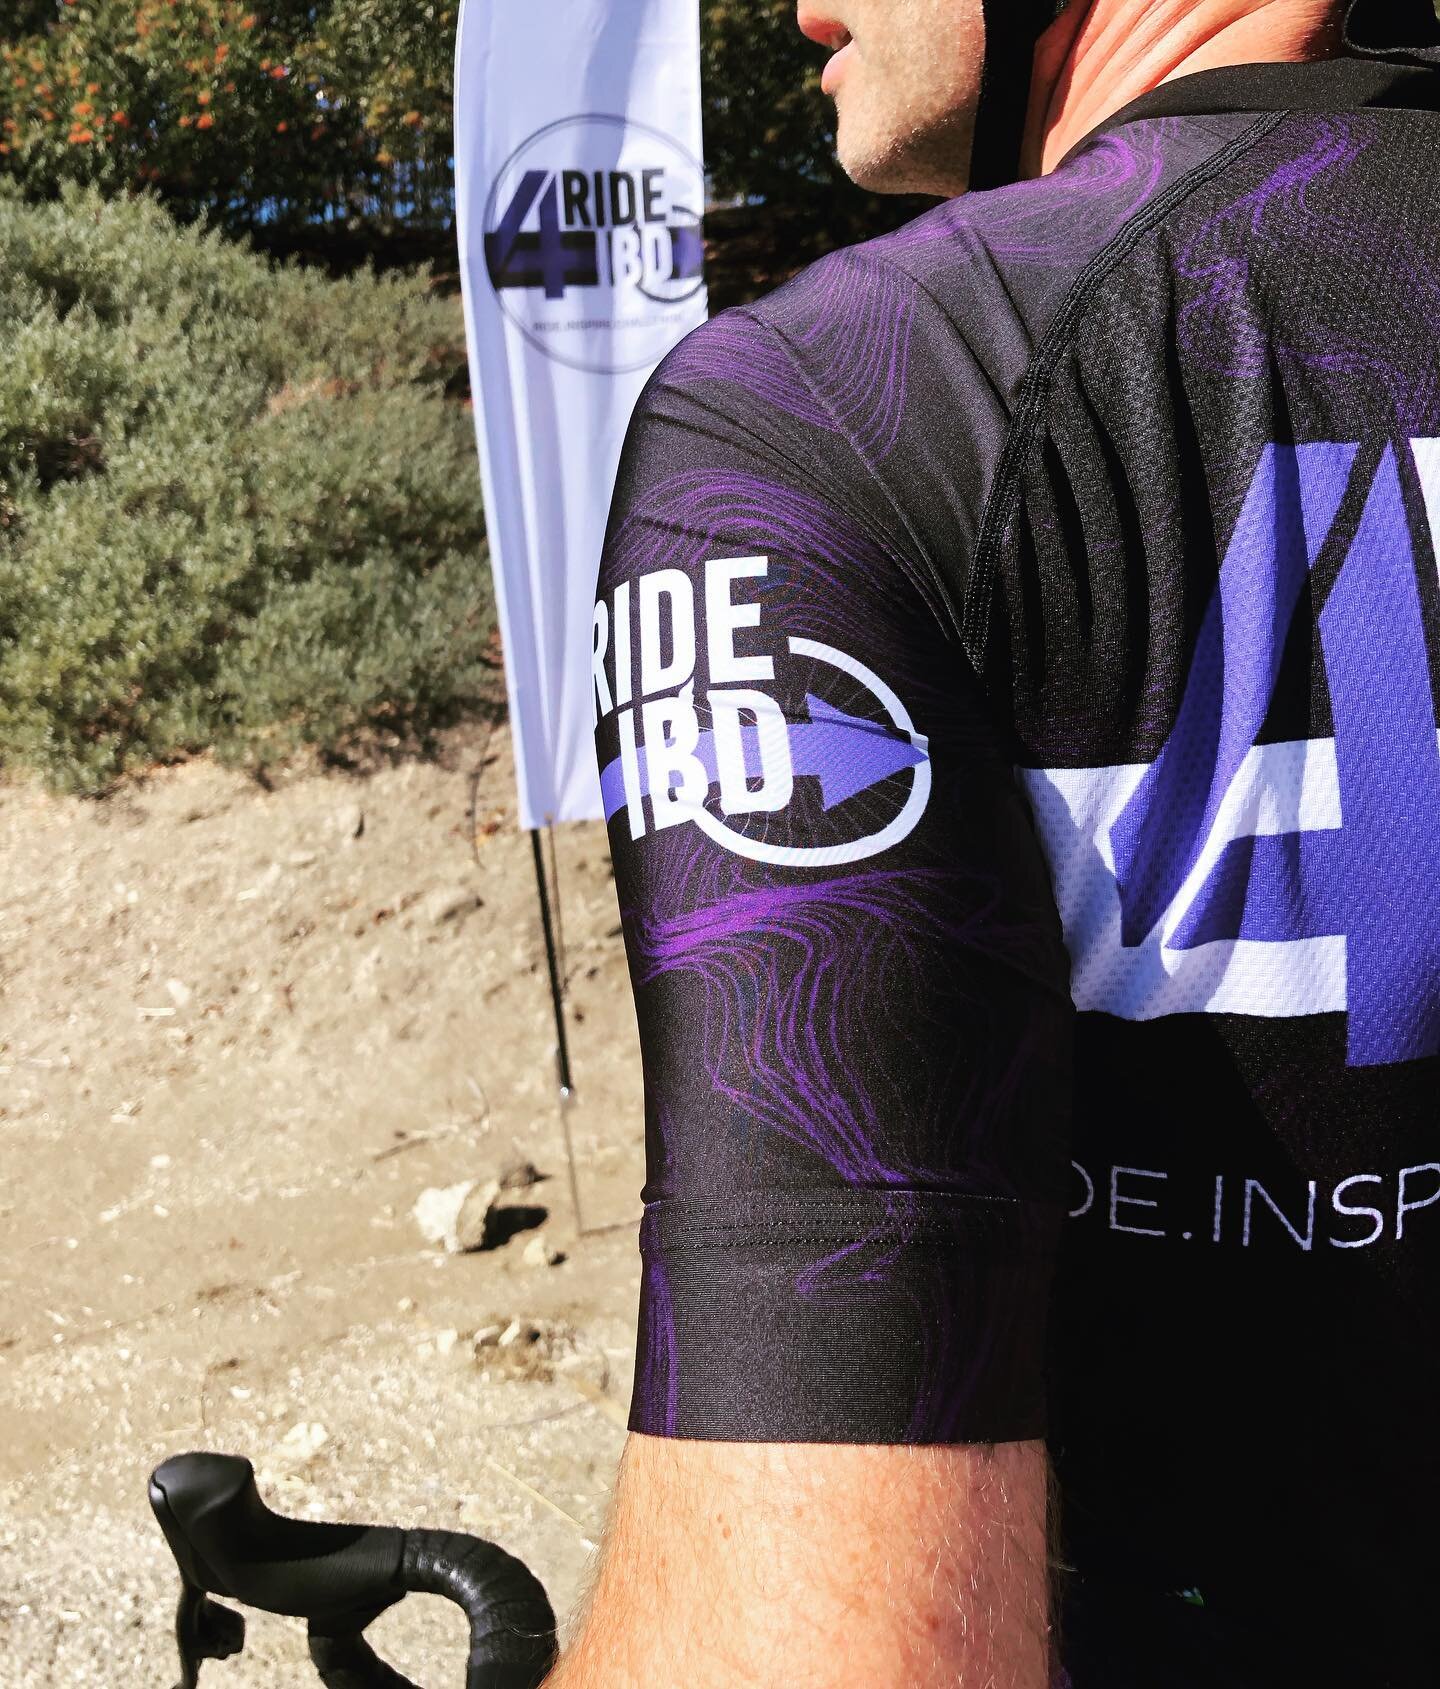 Happy New Year from all of us at Ride4ibd. 

Thank you for helping us Ride. Inspire. Challenge. IBD in 2022. Over the past year we have strived to grow our awareness efforts for IBD, both on and off the bike, helping to connect and expand our communi